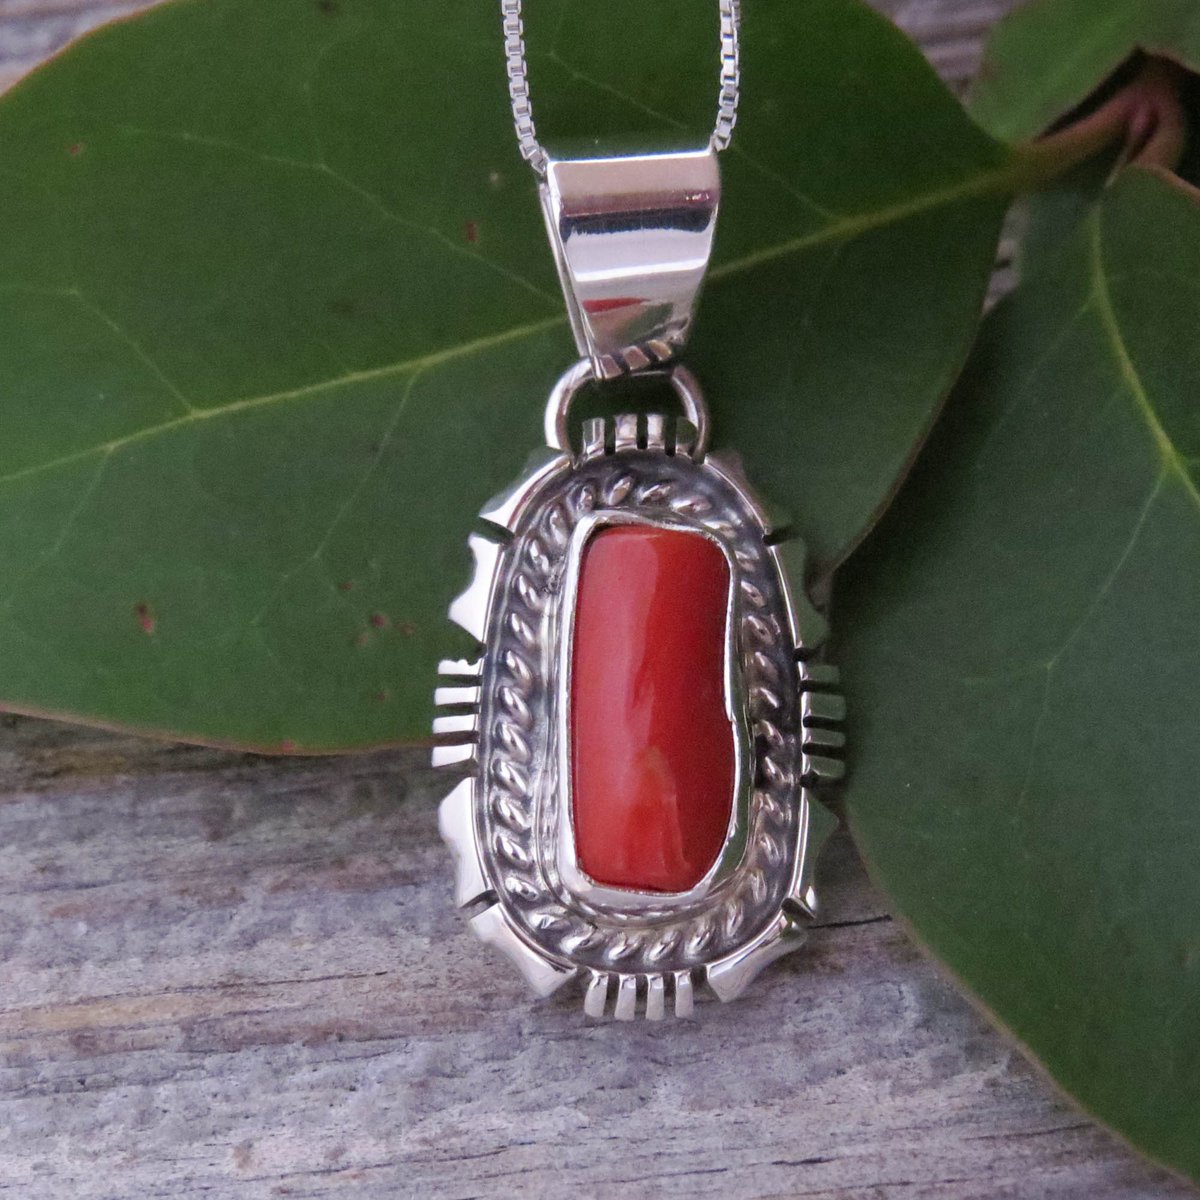 Red Coral brings color to every occasion! Native American Red Coral Sterling Silver Necklace SHOP HERE:🌺 etsy.me/3PLk4GV 🌺
#coraljewelry #redjewelry #nativeamericanjewelry #sterlingsilvernecklace #southwesternjewelry